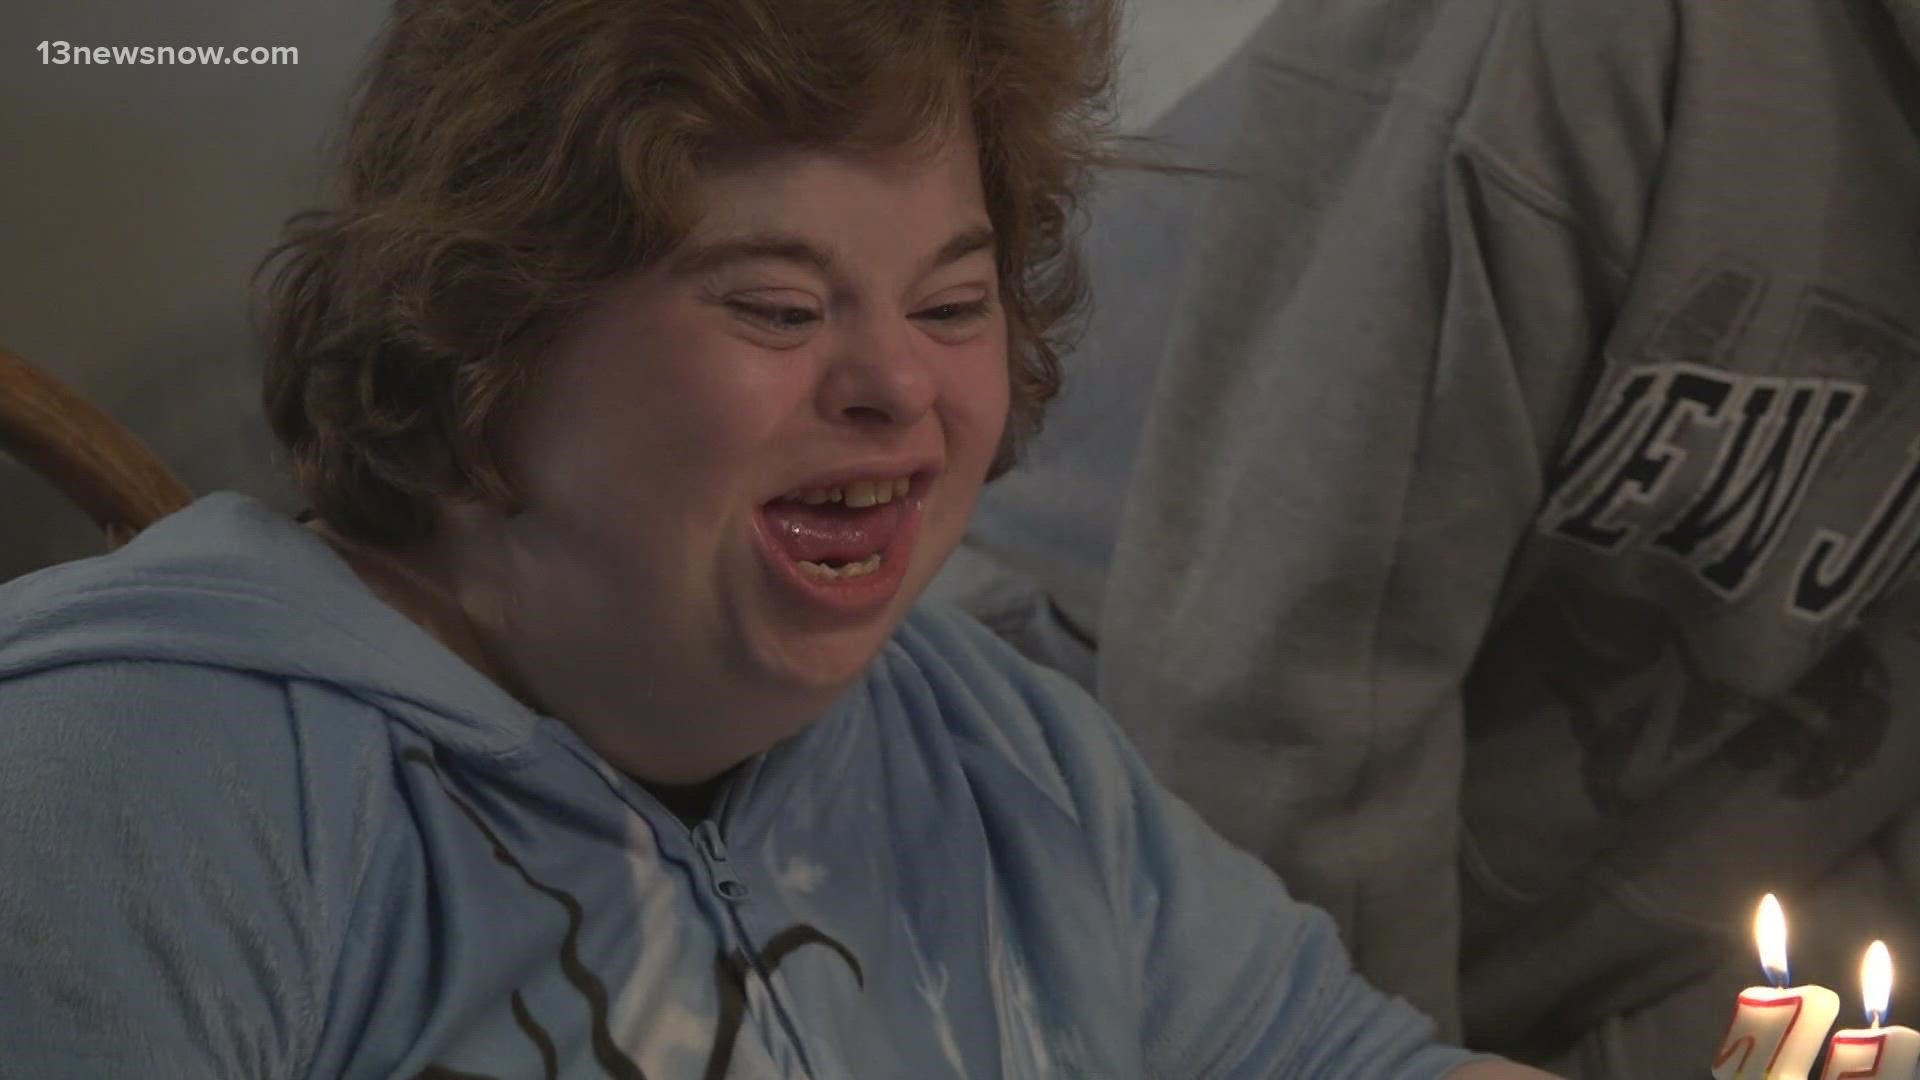 A traumatic experience has turned into a second chance for a Virginia Beach woman with down syndrome. Beki Powell just got to celebrate her 35th birthday.